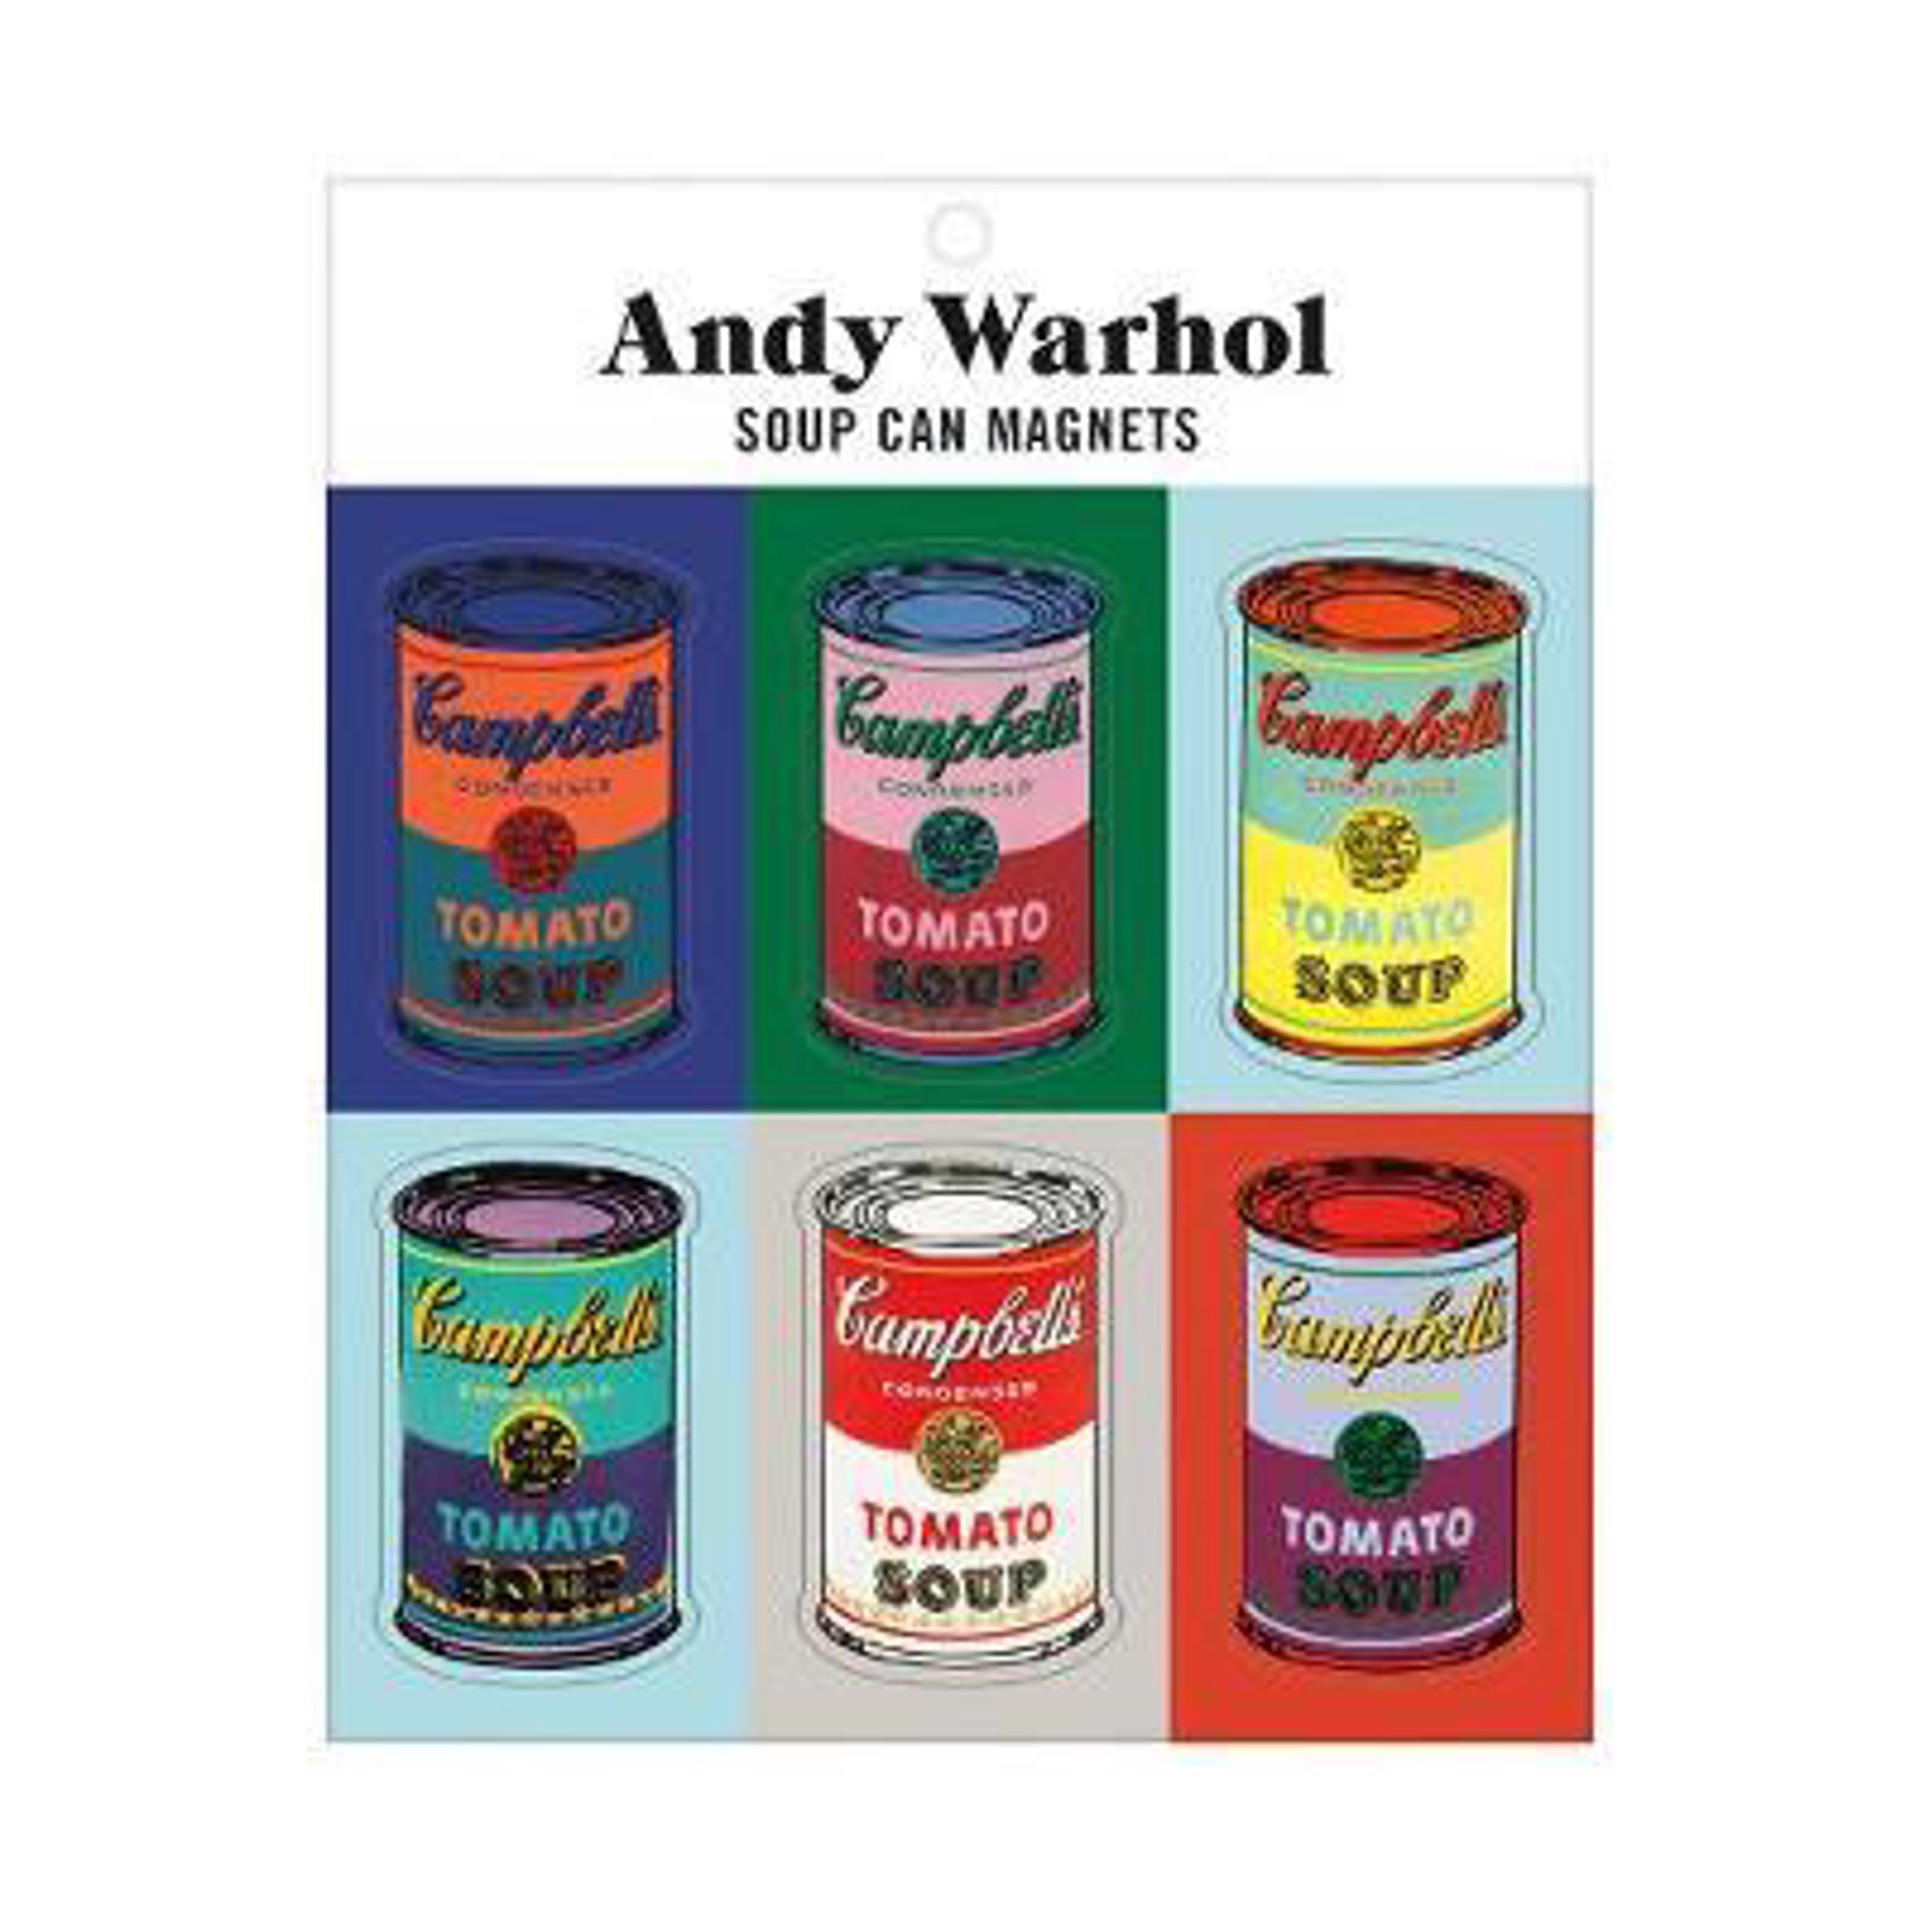 Soup Can Magnets by Andy Warhol